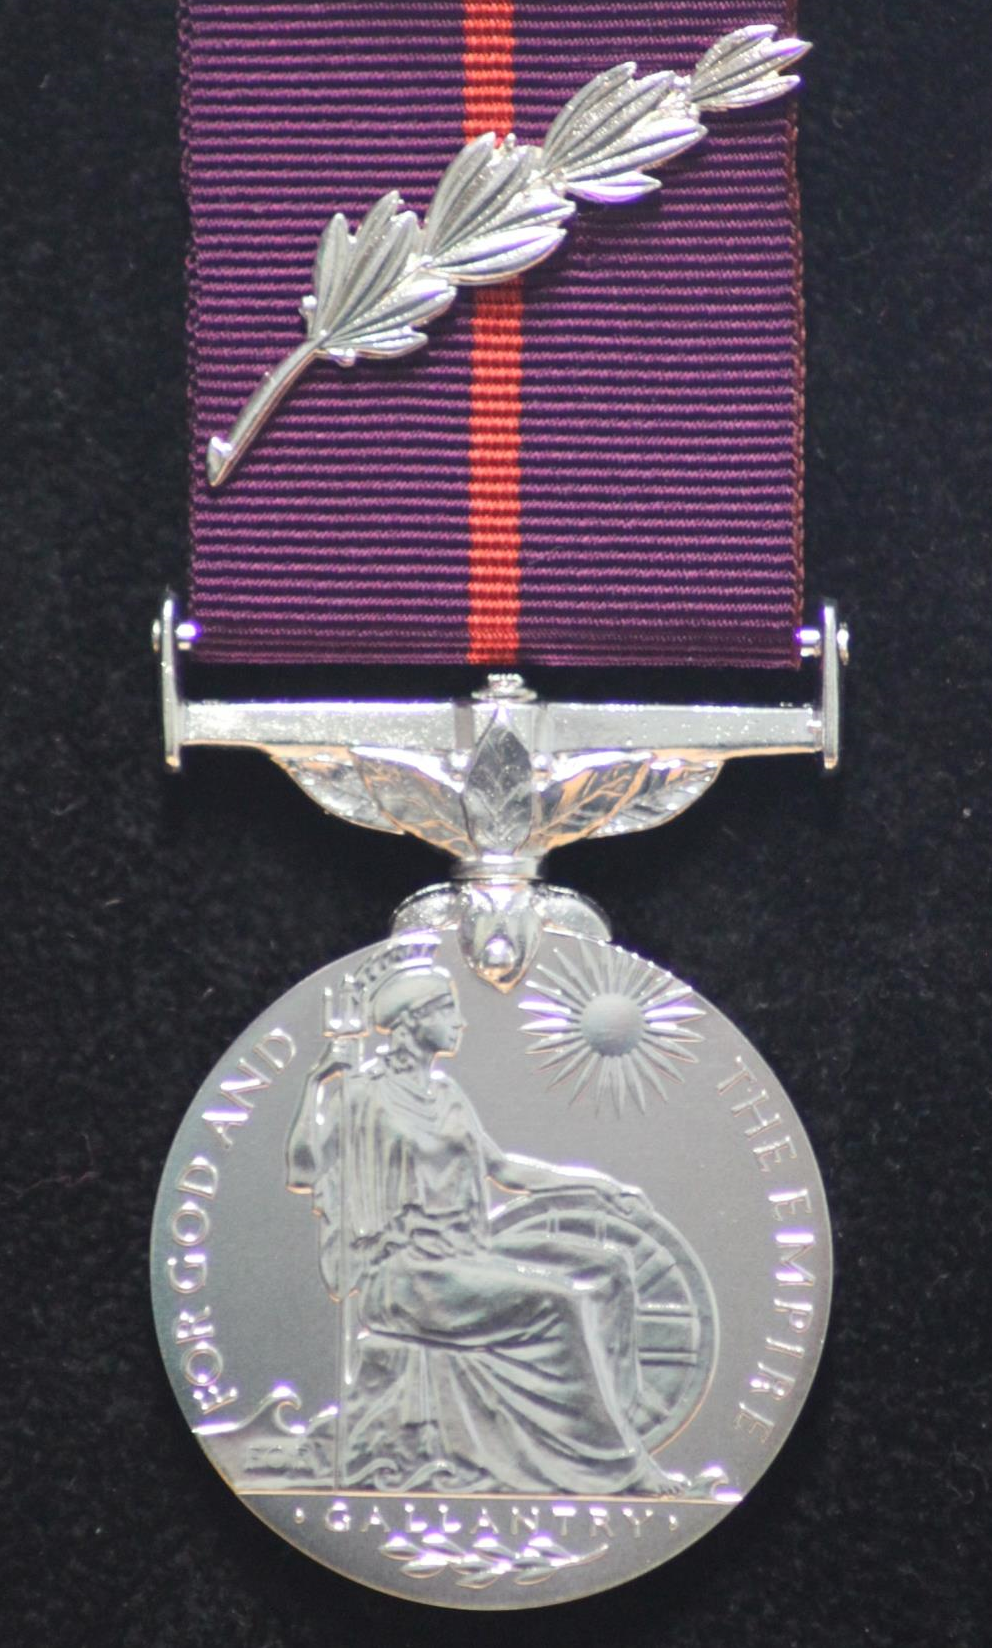 Worcestershire Medal Service: Empire Gallantry Medal (EGM) GV (Military) 1933-1936